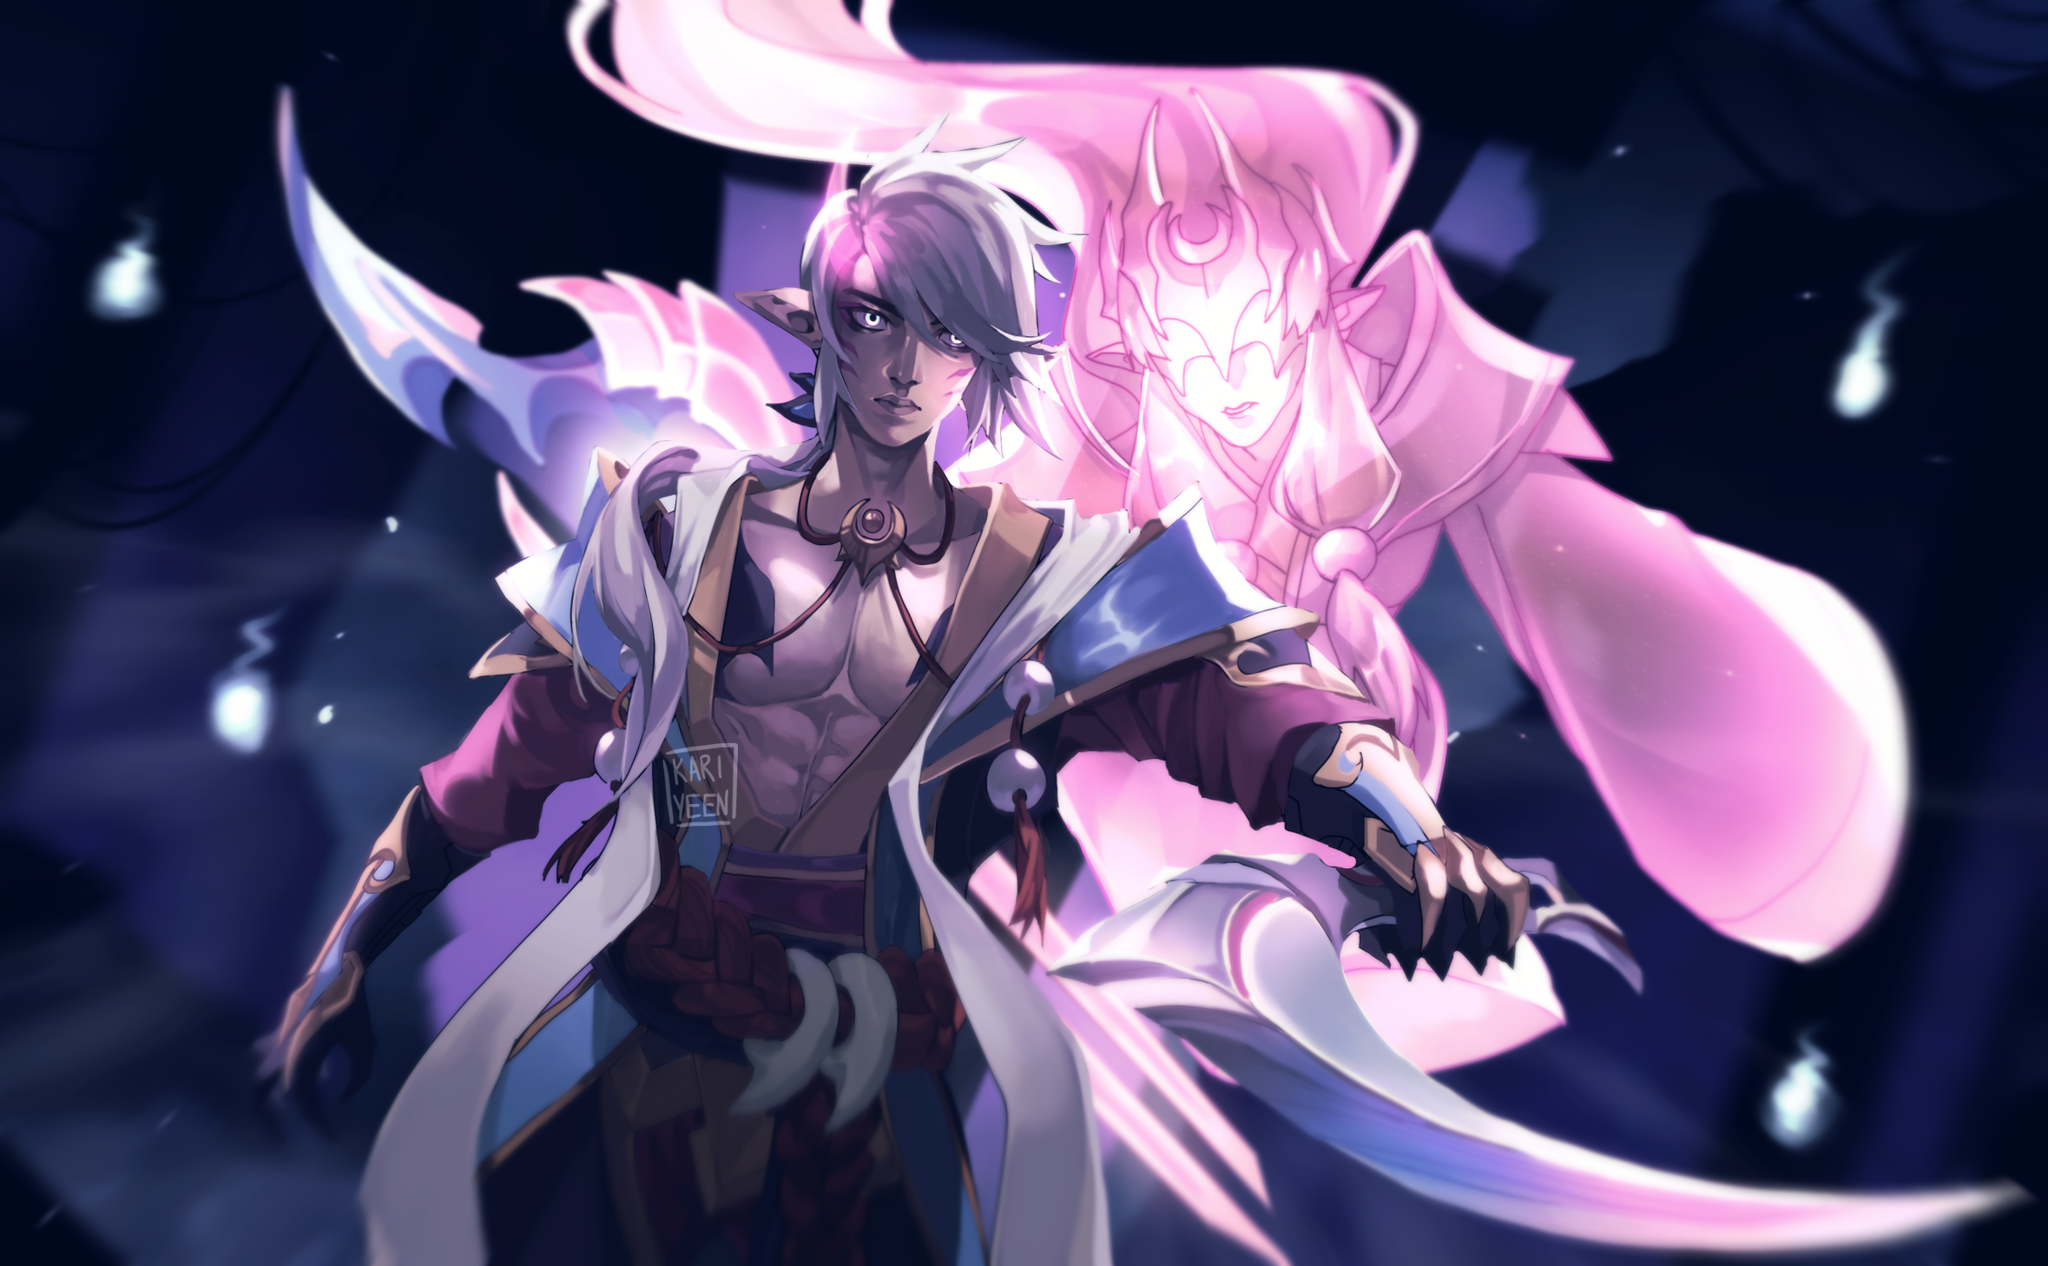 “I wanted a new skin for my main so I drew Spirit Blossom Aphelios. 